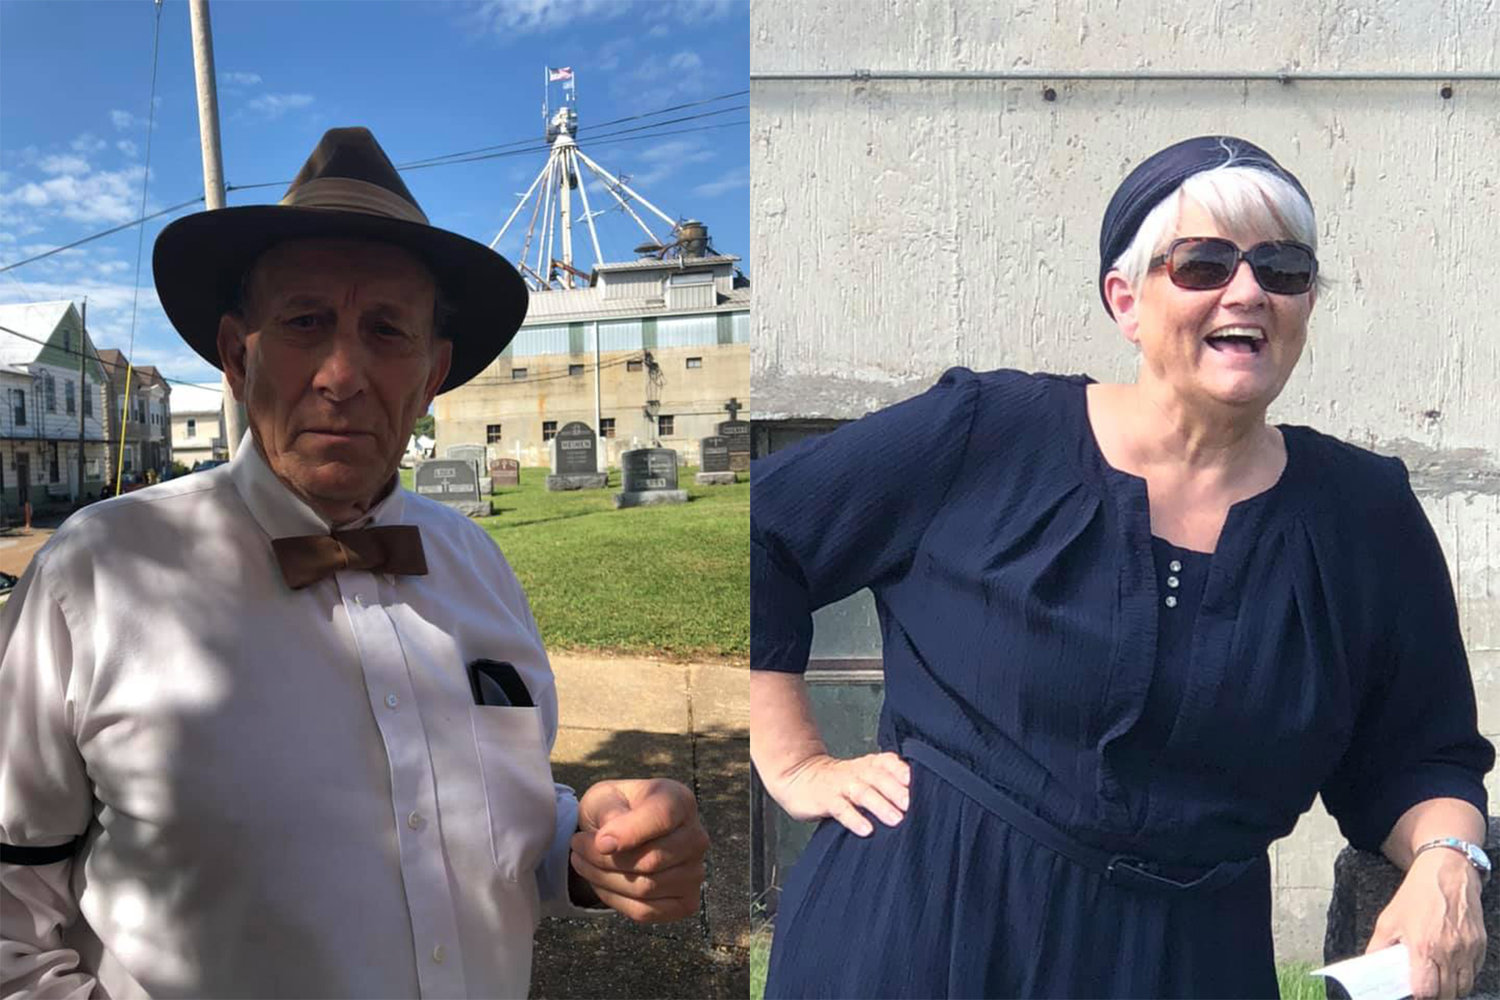 LEFT: Hubert John Backes gets into the spirit of the event. RIGHT: Caroline Brandt Pearon portrays Wilhelmina Rehagen Sonnen Muehling Daube at Immaculate Conception parish’s “Voices from the Past” cemetery tour in Loose Creek, although she is not related to her.